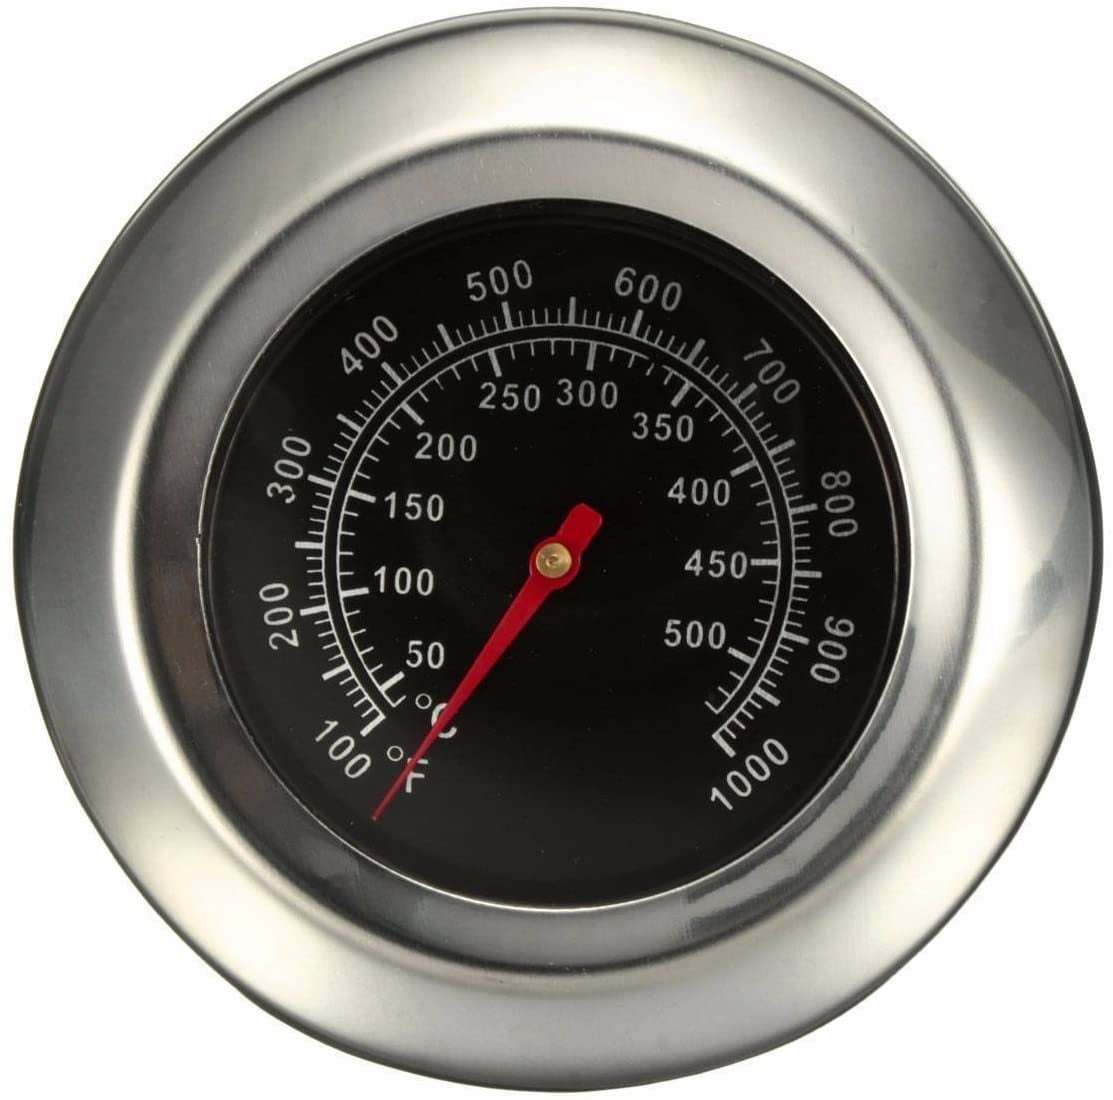 METALTEX STAINLESS STEEL MEAT POULTRY BBQ COOKING OVEN THERMOMETER TEMPERATURE 